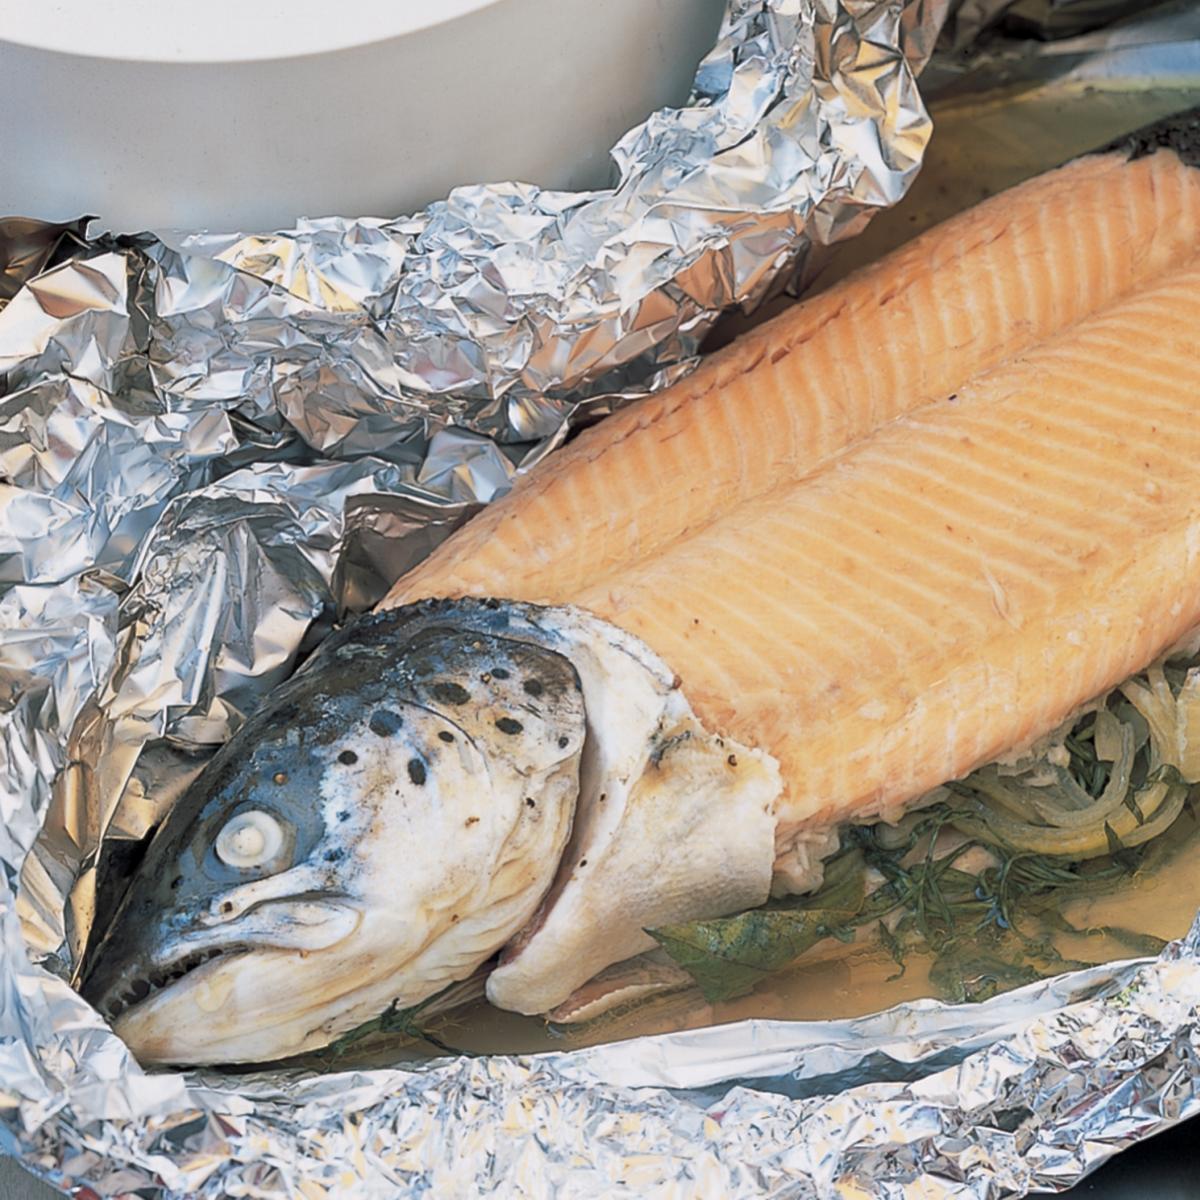 Foil Baked Salmon Served With English Parsley Sauce Recipes Delia Online